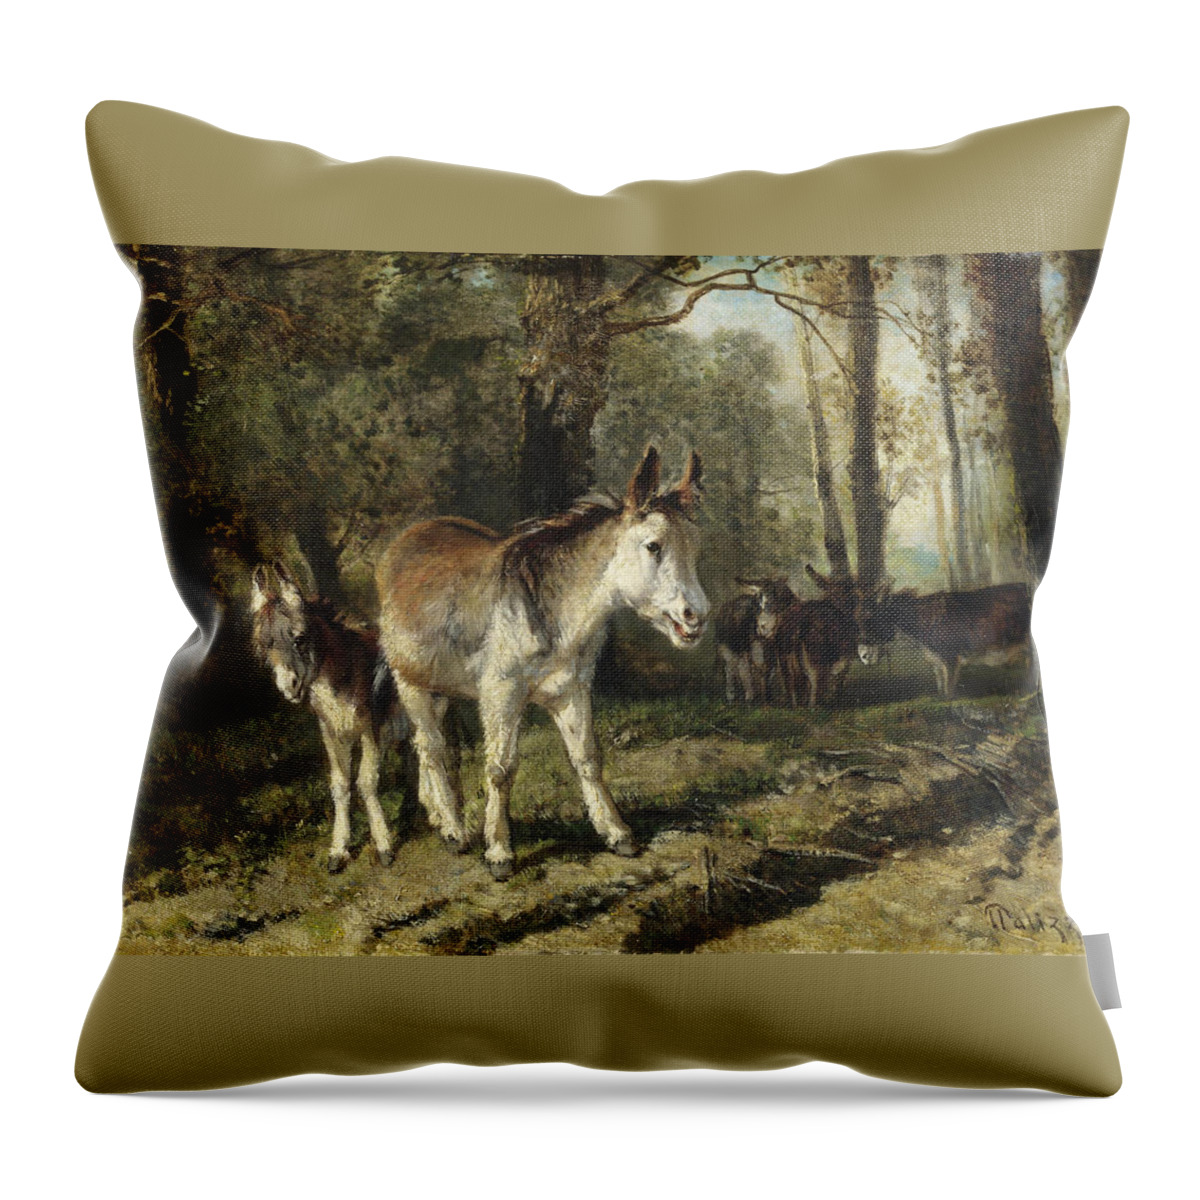 Giuseppe Palizzi Throw Pillow featuring the painting Donkeys by Giuseppe Palizzi